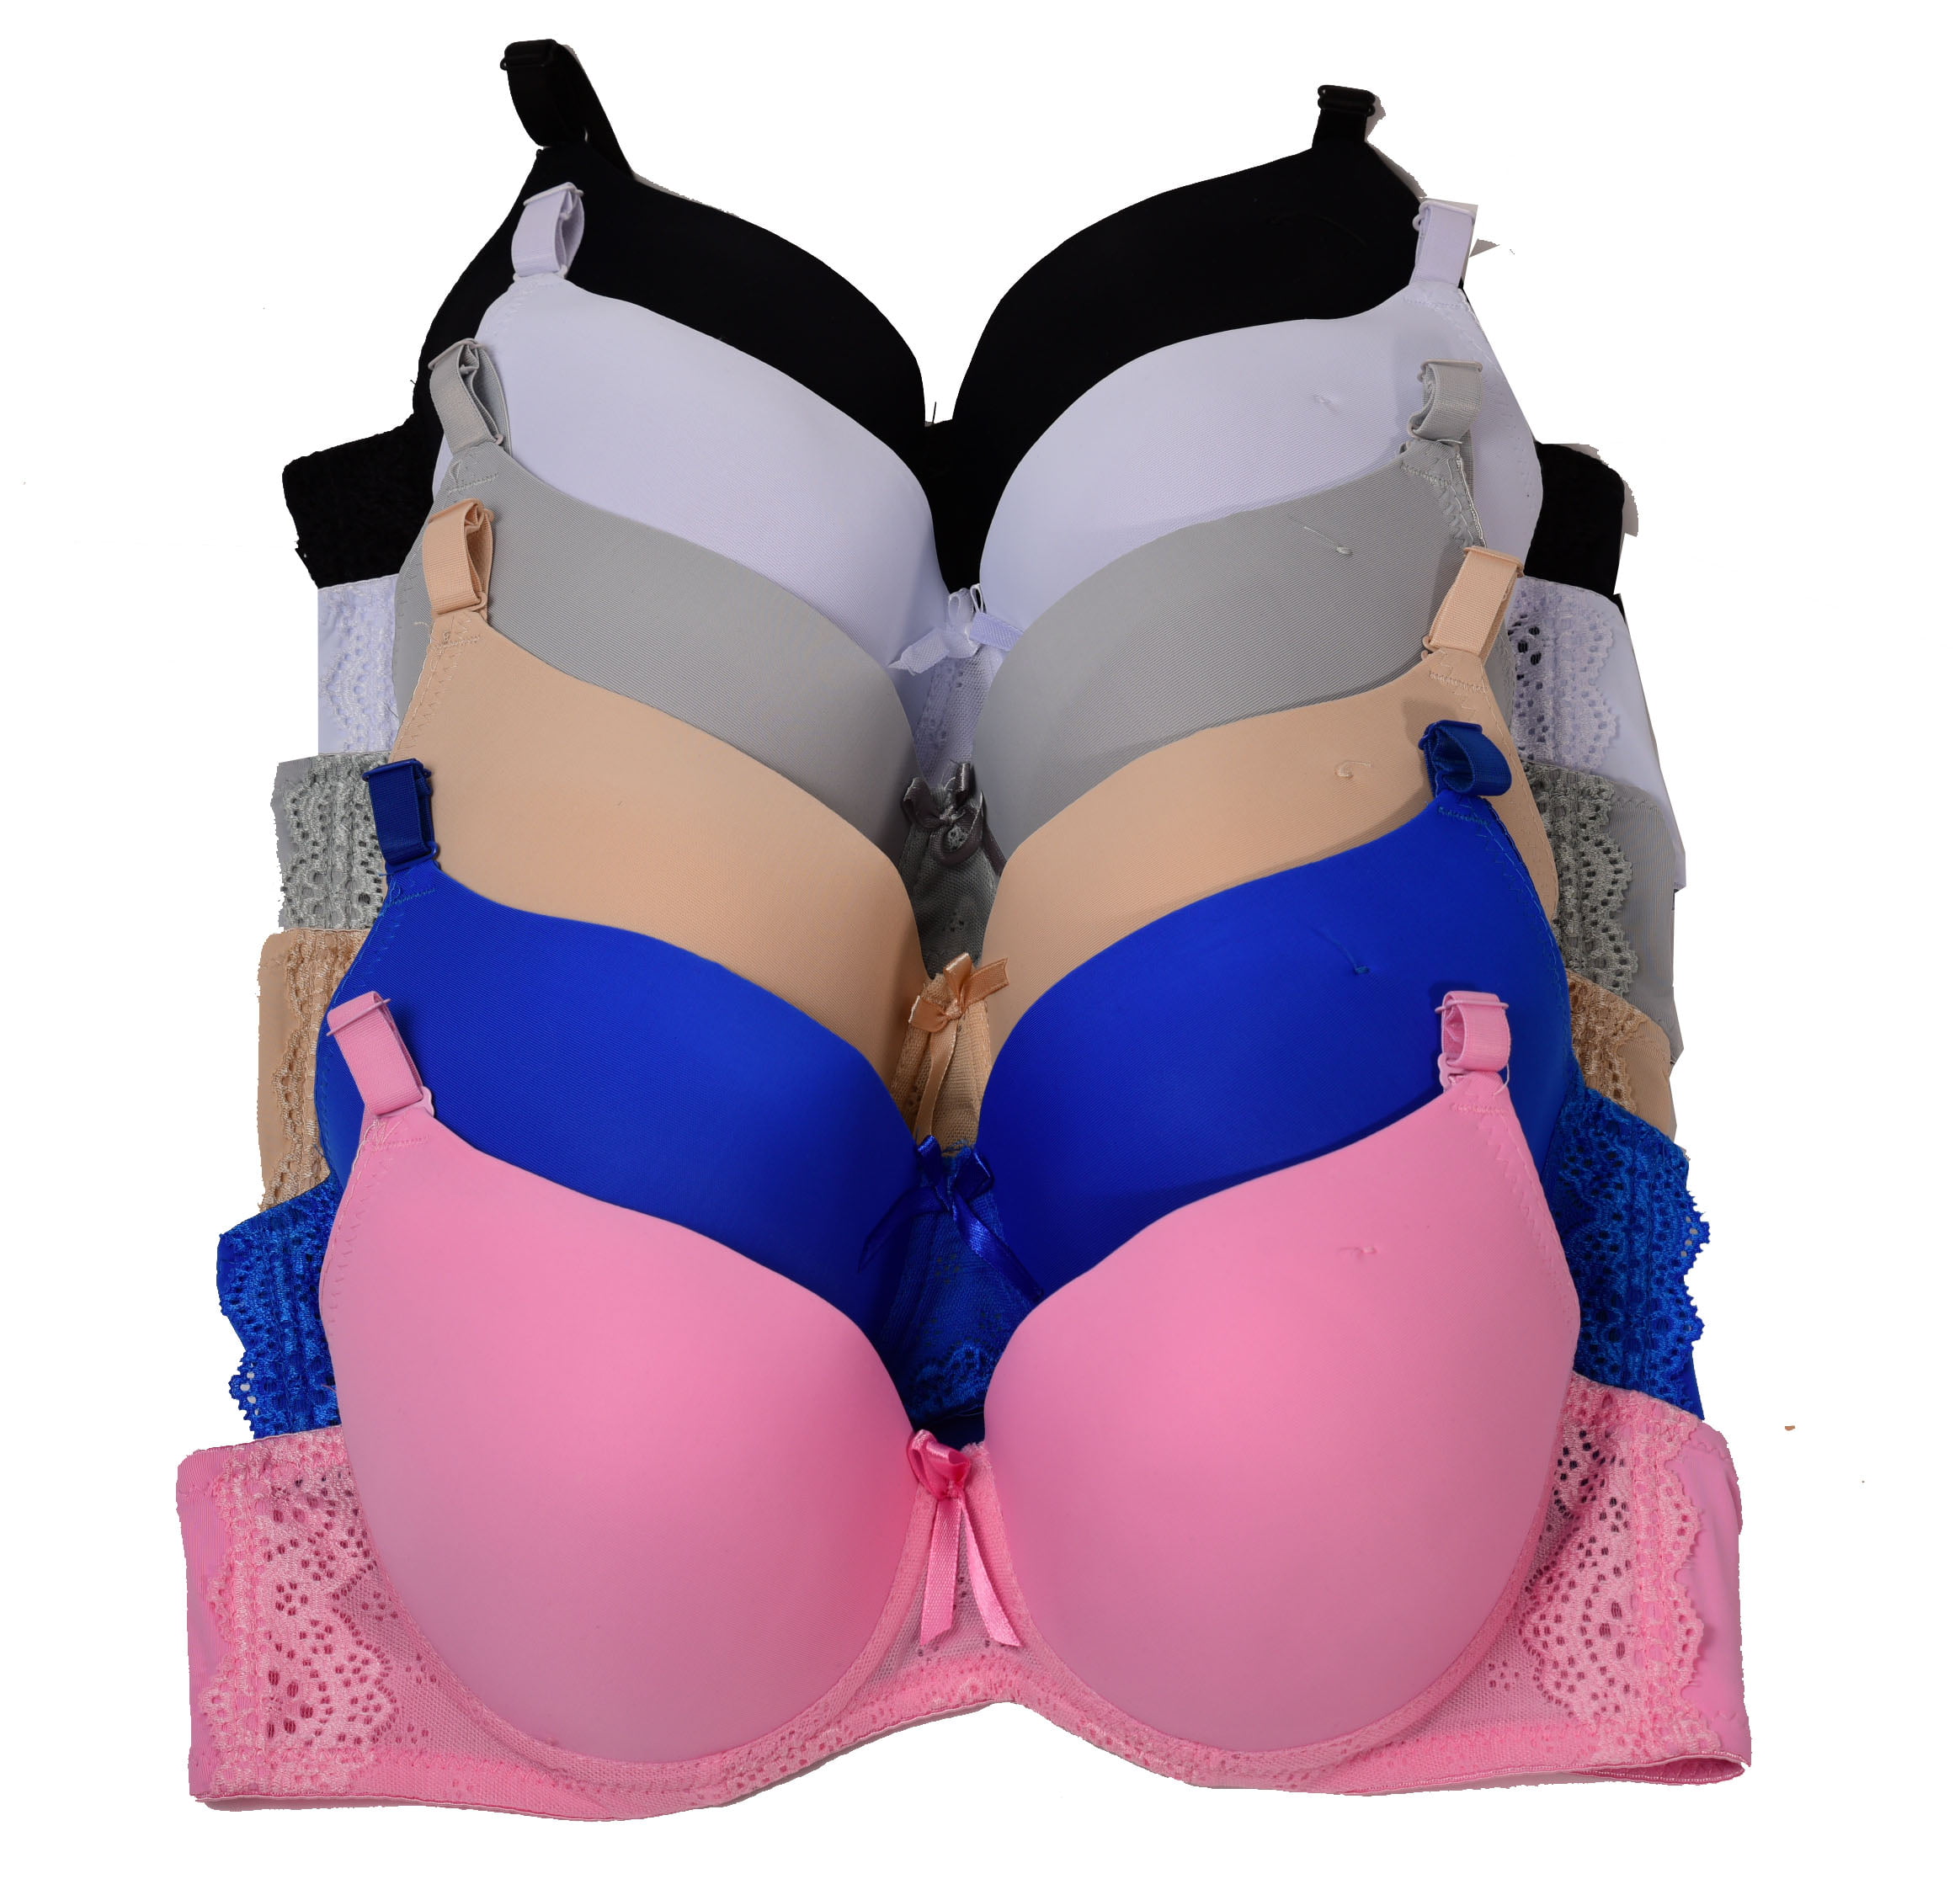 Women Bras 6 Pack of BraB cup C cup Size 34C (6672)